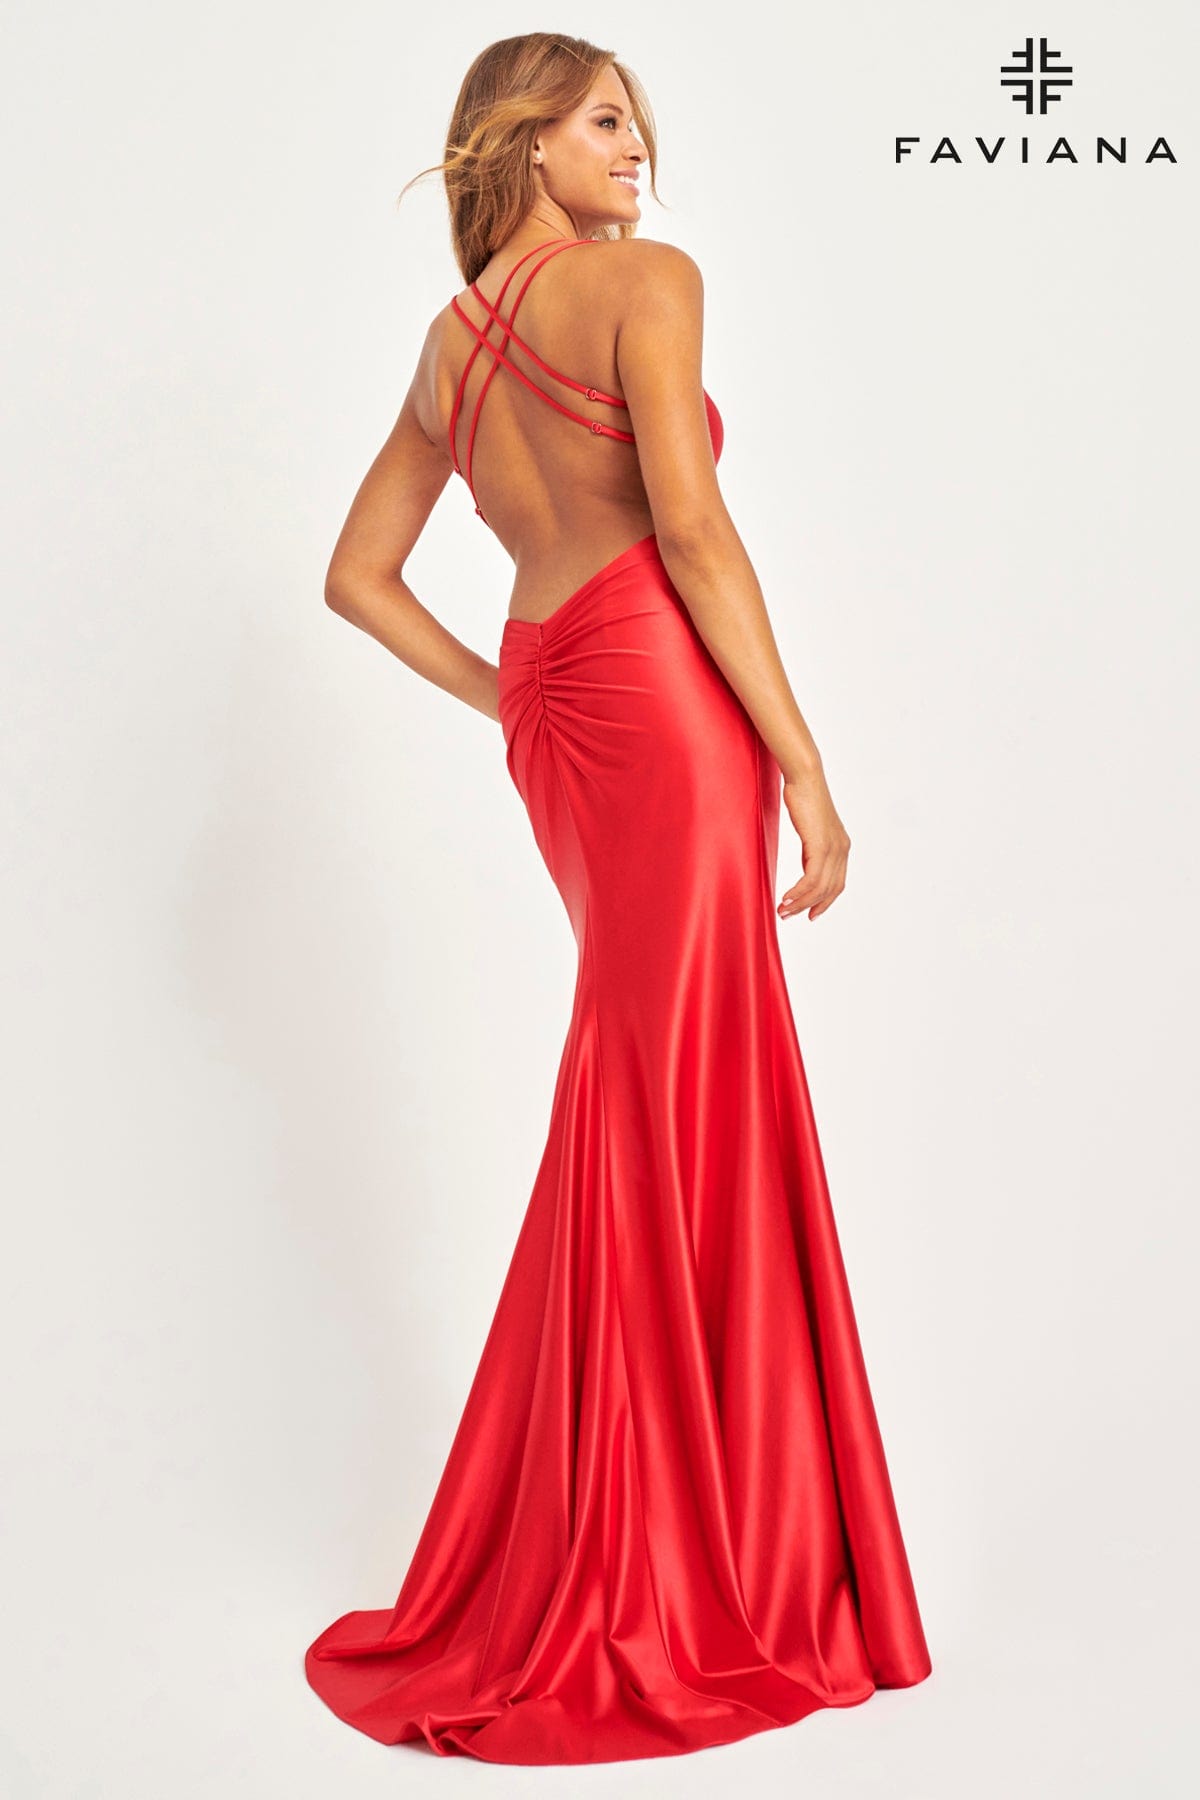 Red Sleek Satin Evening Dress With Scoop Neck And Knot Waist